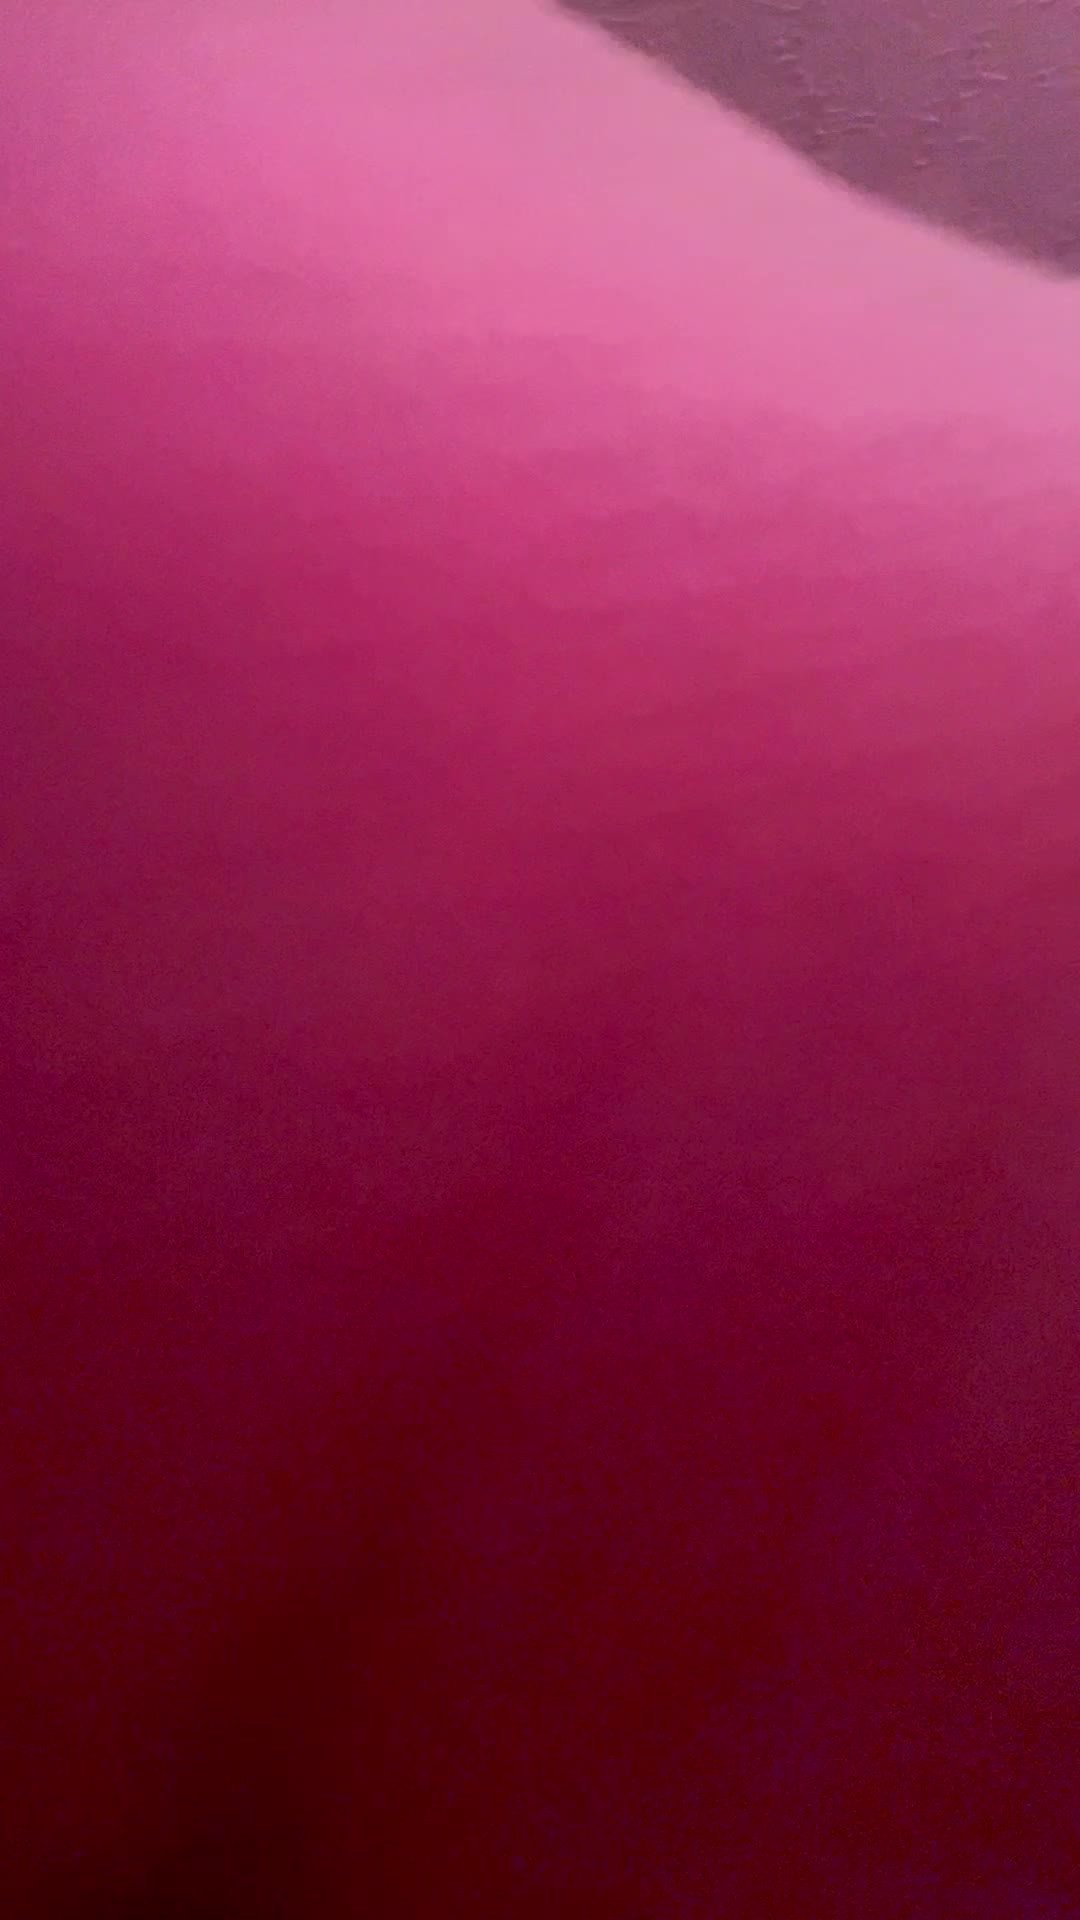 Video post by Pussylover42069